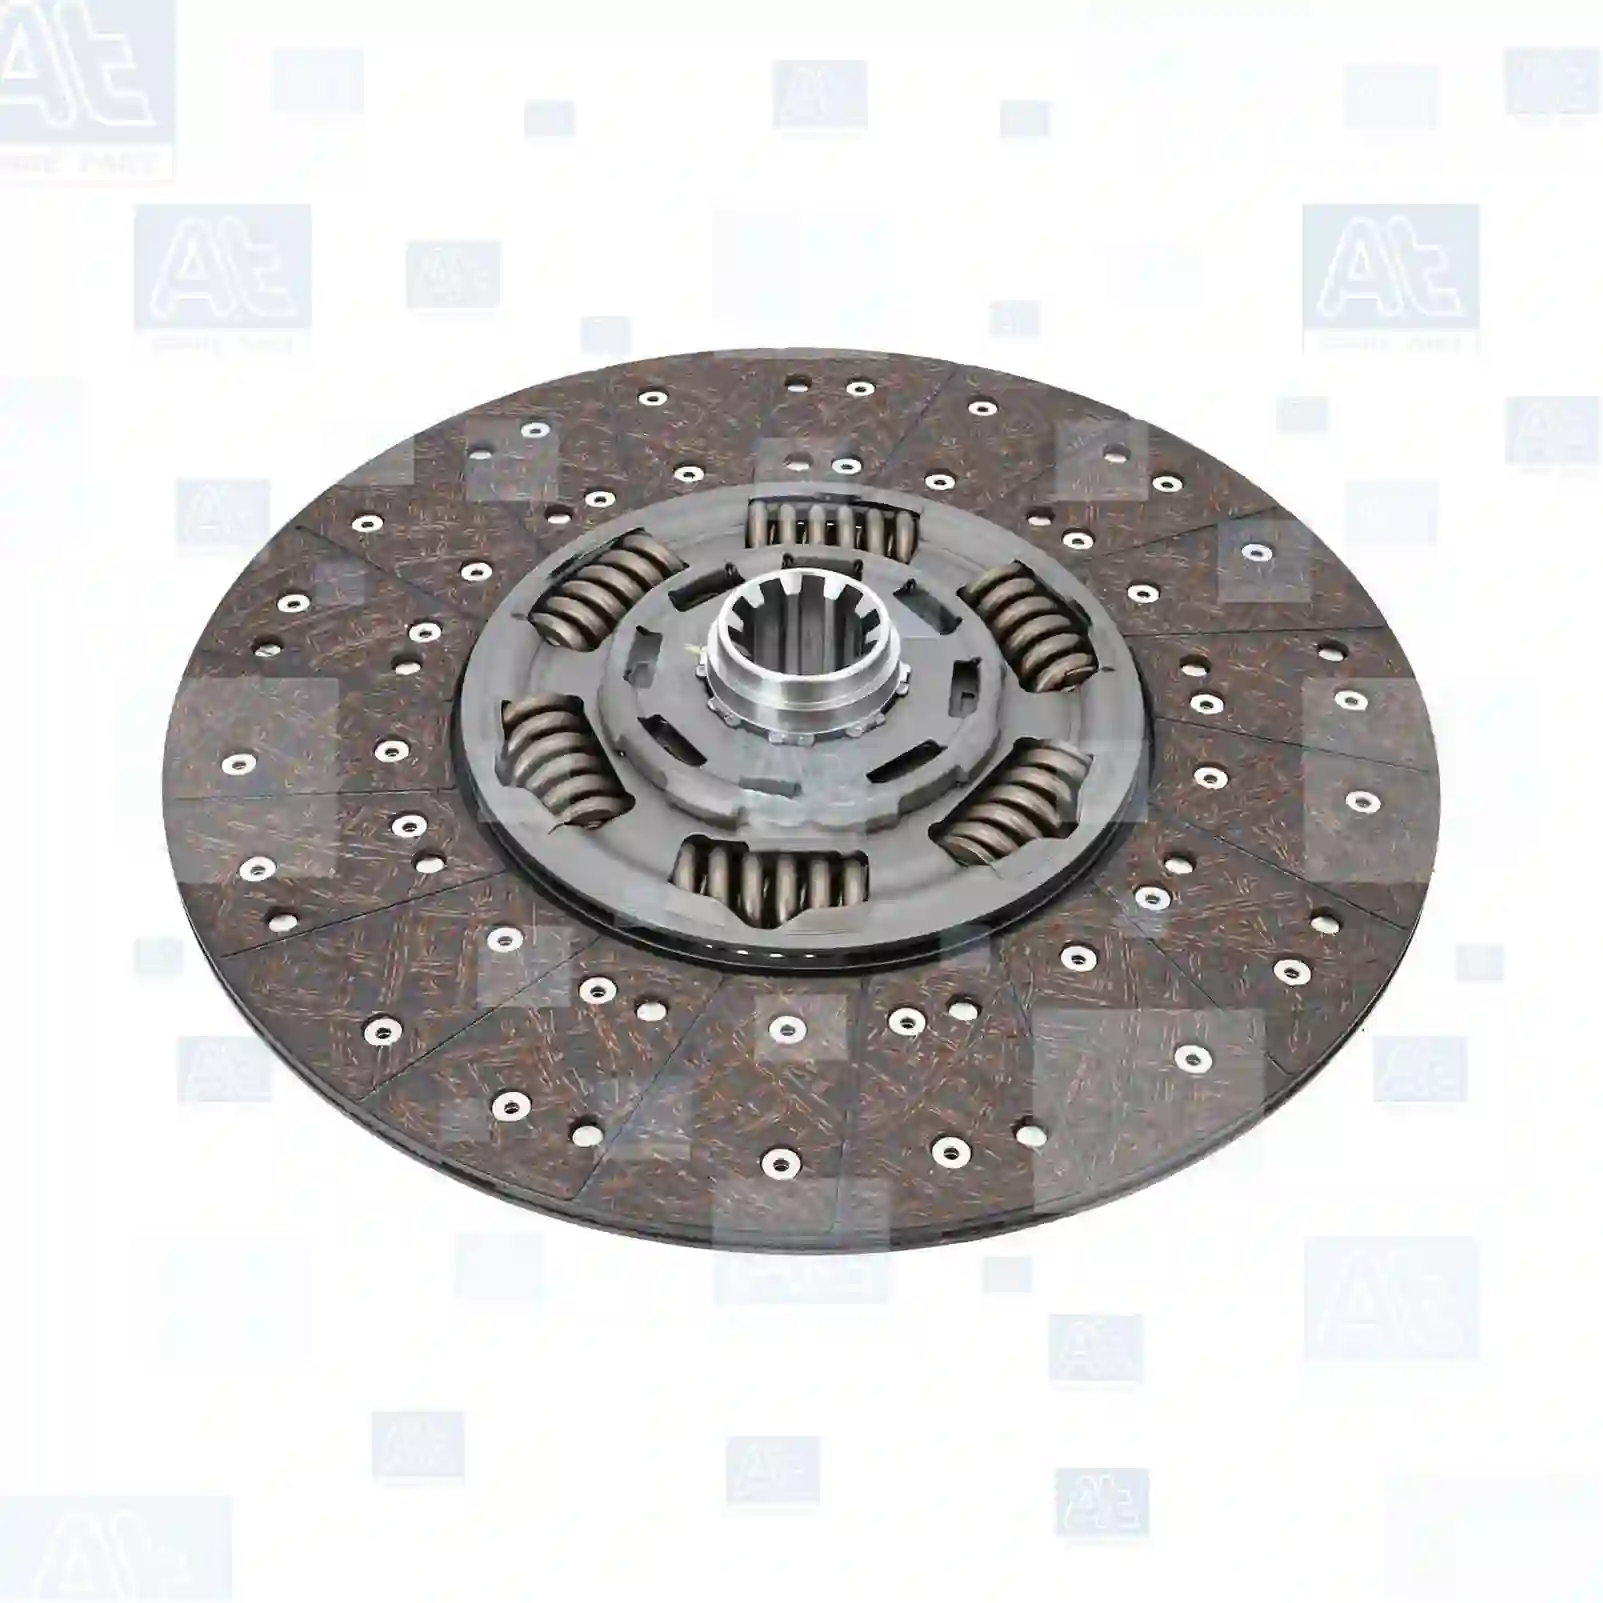 Clutch disc, at no 77721895, oem no: 1663218, 1685707, 1685707A, 1685707R, 1688219, 1846416, 1846416A, 1846416R, 7C467550BA, T165054, 42022207, 504336615, 216300120, 51303010003, 51303010004, 51303010009, 51303010010, 81303010217, 81303010218, 81303010219, 81303010220, 81303010222, 81303010223, 81303010224, 81303010225, 81303010256, 81303010257, 81303010258, 81303010289, 81303010322, 81303010323, 81303010325, 81303010326, 81303010327, 81303010360, 81303010366, 81303010383, 81303010390, 81303010391, 81303010402, 81303010407, 81303010408, 81303010418, 81303010419, 81303010441, 81303010464, 81303010487, 81303010501, 81303010502, 81303010504, 81303010505, 81303010521, 81303010569, 81303010574, 81303010578, 81303010669, 81303016099, 81303019217, 81303019218, 81303019219, 81303019220, 81303019322, 81303019325, 81303019326, 81303019327, 81303019360, 81303019402, 81303019407, 81303019419, 81303019487, 81303019505, 81303019513, 81303019569, 81303019596, 81303019628, 81303019669, 0122509003, 0122509103, 0152509503, 0162504903, 0182508003, 011009997, 011010000, 011060226, 011079830, 042132400, 042134110, 81303010327, 5010244303, 5010244325, 5010245455, 5010452955, 5010545038, 5010545829, 5010613657, 7420076710, 7421076710, TW00718, ZG30294-0008 At Spare Part | Engine, Accelerator Pedal, Camshaft, Connecting Rod, Crankcase, Crankshaft, Cylinder Head, Engine Suspension Mountings, Exhaust Manifold, Exhaust Gas Recirculation, Filter Kits, Flywheel Housing, General Overhaul Kits, Engine, Intake Manifold, Oil Cleaner, Oil Cooler, Oil Filter, Oil Pump, Oil Sump, Piston & Liner, Sensor & Switch, Timing Case, Turbocharger, Cooling System, Belt Tensioner, Coolant Filter, Coolant Pipe, Corrosion Prevention Agent, Drive, Expansion Tank, Fan, Intercooler, Monitors & Gauges, Radiator, Thermostat, V-Belt / Timing belt, Water Pump, Fuel System, Electronical Injector Unit, Feed Pump, Fuel Filter, cpl., Fuel Gauge Sender,  Fuel Line, Fuel Pump, Fuel Tank, Injection Line Kit, Injection Pump, Exhaust System, Clutch & Pedal, Gearbox, Propeller Shaft, Axles, Brake System, Hubs & Wheels, Suspension, Leaf Spring, Universal Parts / Accessories, Steering, Electrical System, Cabin Clutch disc, at no 77721895, oem no: 1663218, 1685707, 1685707A, 1685707R, 1688219, 1846416, 1846416A, 1846416R, 7C467550BA, T165054, 42022207, 504336615, 216300120, 51303010003, 51303010004, 51303010009, 51303010010, 81303010217, 81303010218, 81303010219, 81303010220, 81303010222, 81303010223, 81303010224, 81303010225, 81303010256, 81303010257, 81303010258, 81303010289, 81303010322, 81303010323, 81303010325, 81303010326, 81303010327, 81303010360, 81303010366, 81303010383, 81303010390, 81303010391, 81303010402, 81303010407, 81303010408, 81303010418, 81303010419, 81303010441, 81303010464, 81303010487, 81303010501, 81303010502, 81303010504, 81303010505, 81303010521, 81303010569, 81303010574, 81303010578, 81303010669, 81303016099, 81303019217, 81303019218, 81303019219, 81303019220, 81303019322, 81303019325, 81303019326, 81303019327, 81303019360, 81303019402, 81303019407, 81303019419, 81303019487, 81303019505, 81303019513, 81303019569, 81303019596, 81303019628, 81303019669, 0122509003, 0122509103, 0152509503, 0162504903, 0182508003, 011009997, 011010000, 011060226, 011079830, 042132400, 042134110, 81303010327, 5010244303, 5010244325, 5010245455, 5010452955, 5010545038, 5010545829, 5010613657, 7420076710, 7421076710, TW00718, ZG30294-0008 At Spare Part | Engine, Accelerator Pedal, Camshaft, Connecting Rod, Crankcase, Crankshaft, Cylinder Head, Engine Suspension Mountings, Exhaust Manifold, Exhaust Gas Recirculation, Filter Kits, Flywheel Housing, General Overhaul Kits, Engine, Intake Manifold, Oil Cleaner, Oil Cooler, Oil Filter, Oil Pump, Oil Sump, Piston & Liner, Sensor & Switch, Timing Case, Turbocharger, Cooling System, Belt Tensioner, Coolant Filter, Coolant Pipe, Corrosion Prevention Agent, Drive, Expansion Tank, Fan, Intercooler, Monitors & Gauges, Radiator, Thermostat, V-Belt / Timing belt, Water Pump, Fuel System, Electronical Injector Unit, Feed Pump, Fuel Filter, cpl., Fuel Gauge Sender,  Fuel Line, Fuel Pump, Fuel Tank, Injection Line Kit, Injection Pump, Exhaust System, Clutch & Pedal, Gearbox, Propeller Shaft, Axles, Brake System, Hubs & Wheels, Suspension, Leaf Spring, Universal Parts / Accessories, Steering, Electrical System, Cabin